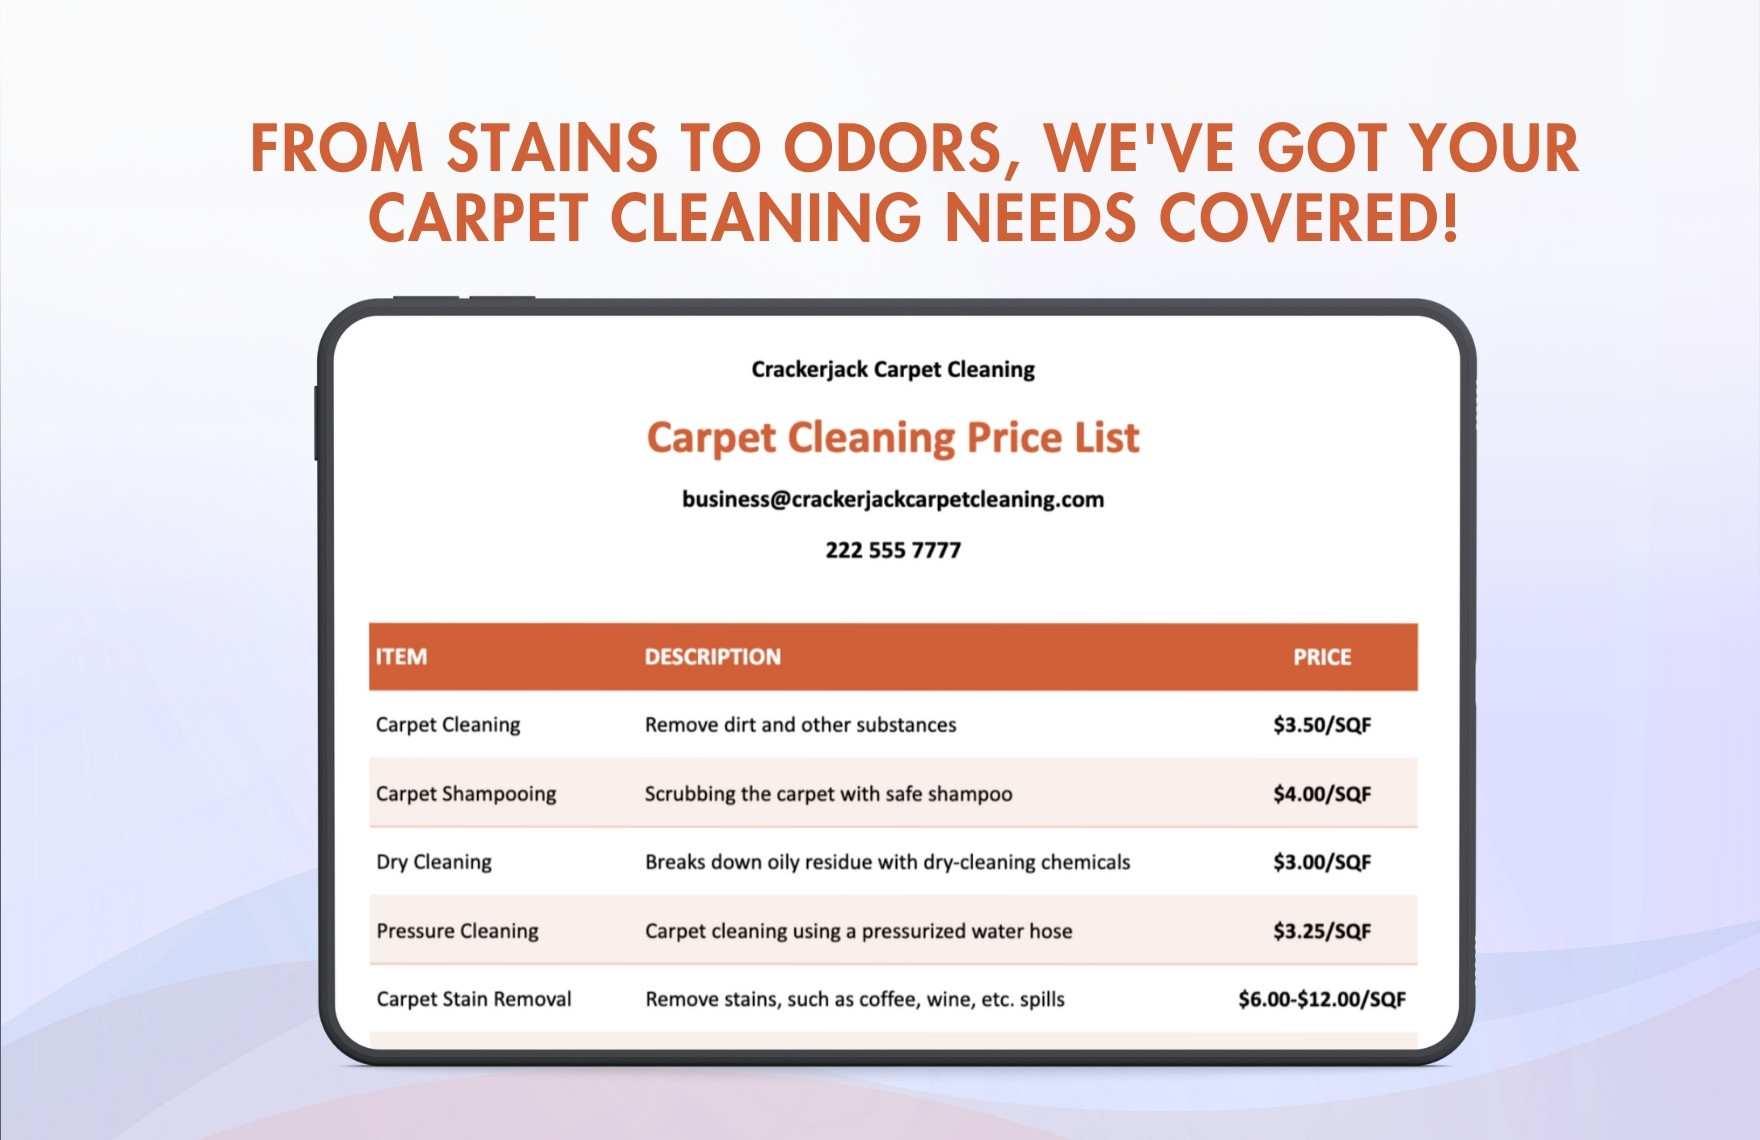 Carpet Cleaning Prices List Template